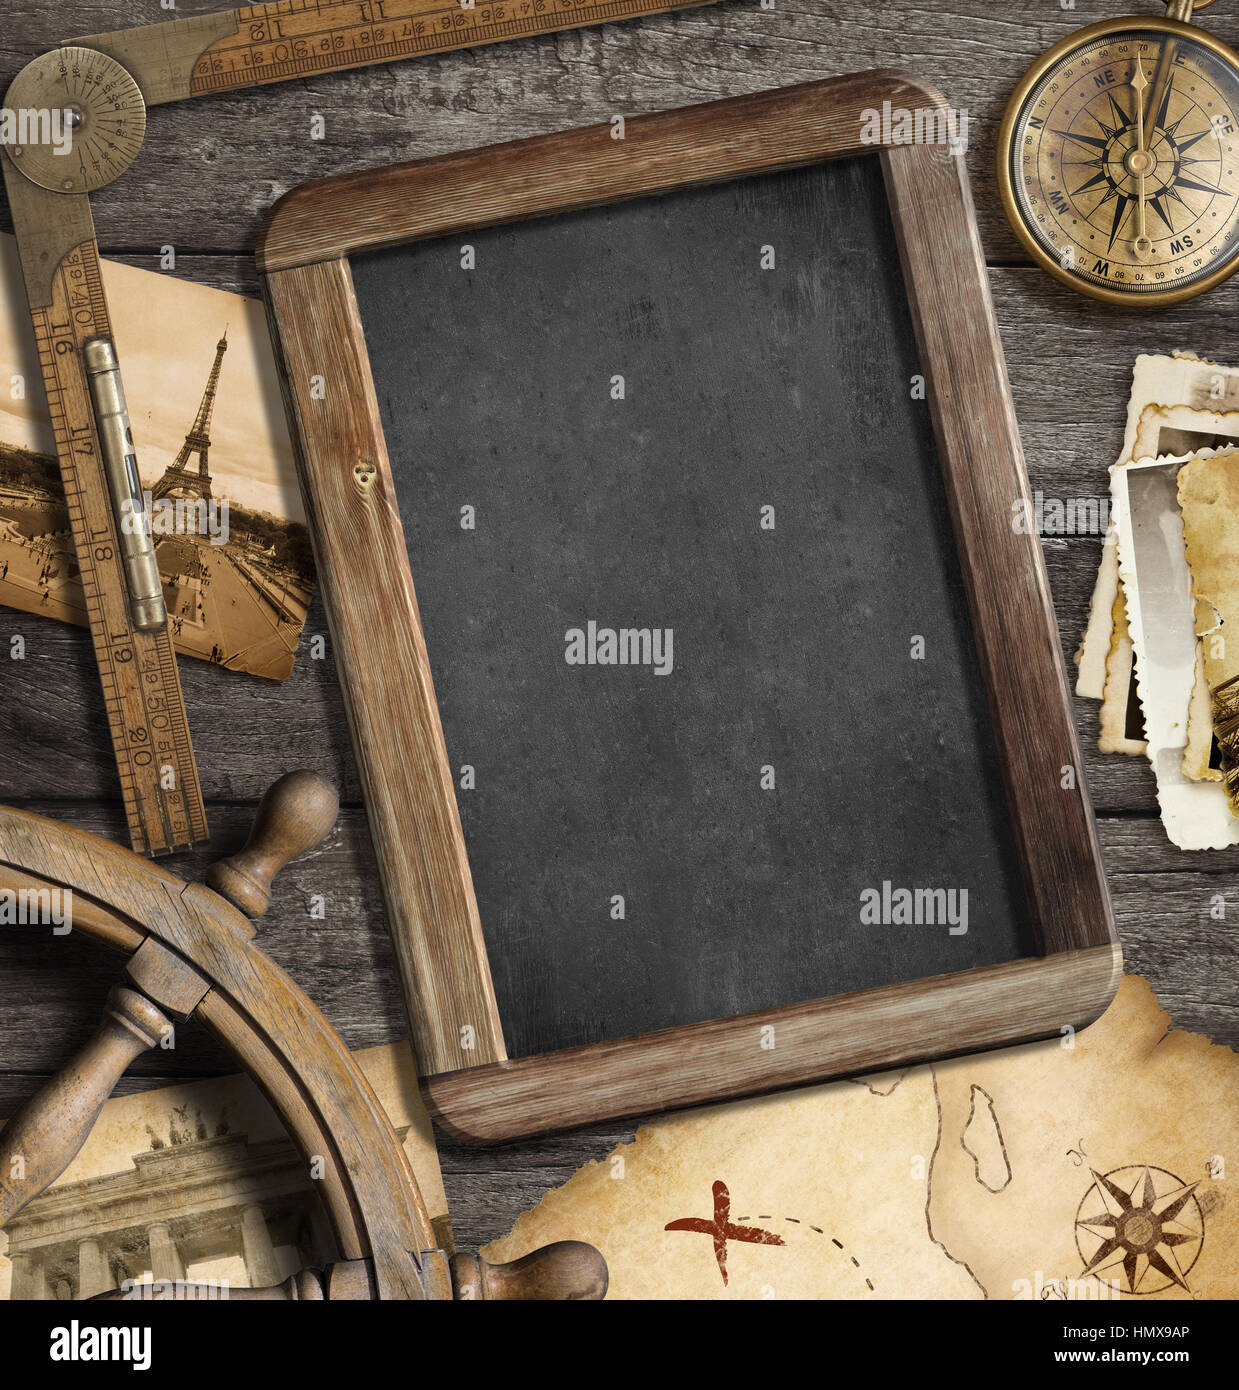 Vintage treasure map, blackboard with copyspace, old compass still life. Adventure or discovery concept. Stock Photo